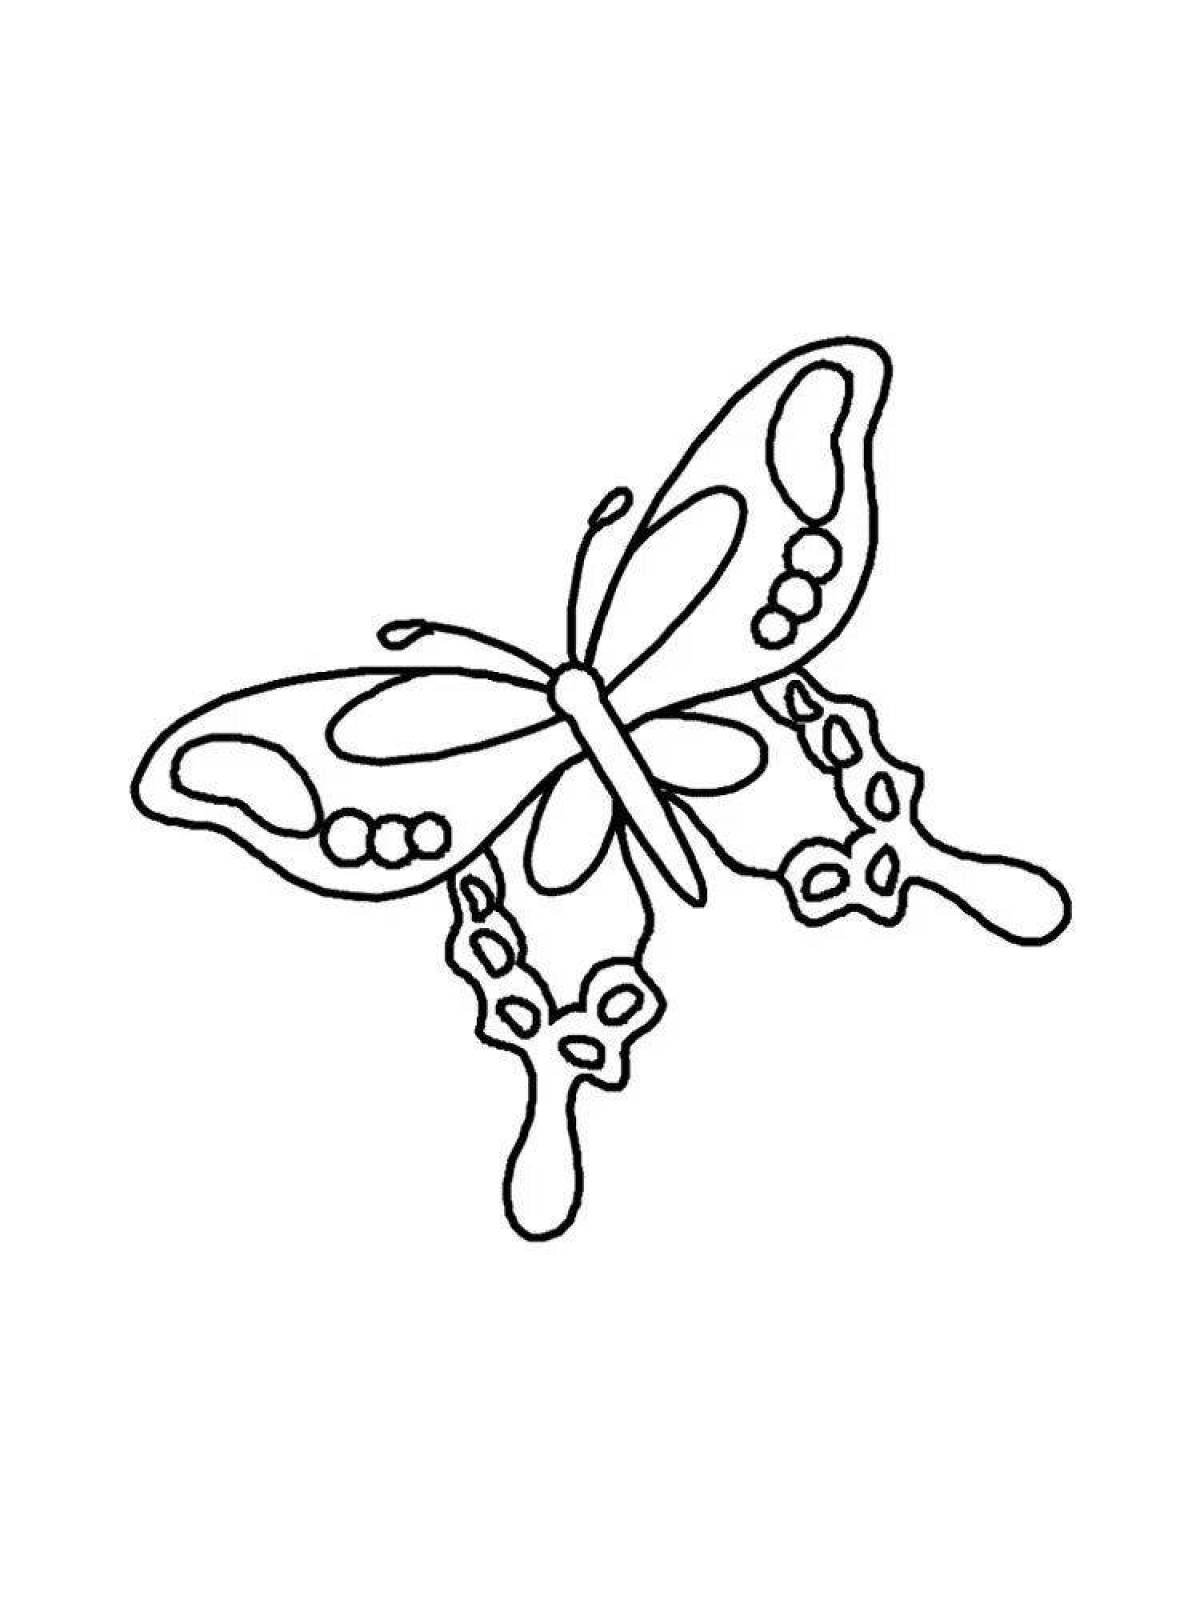 Awesome butterfly coloring pages